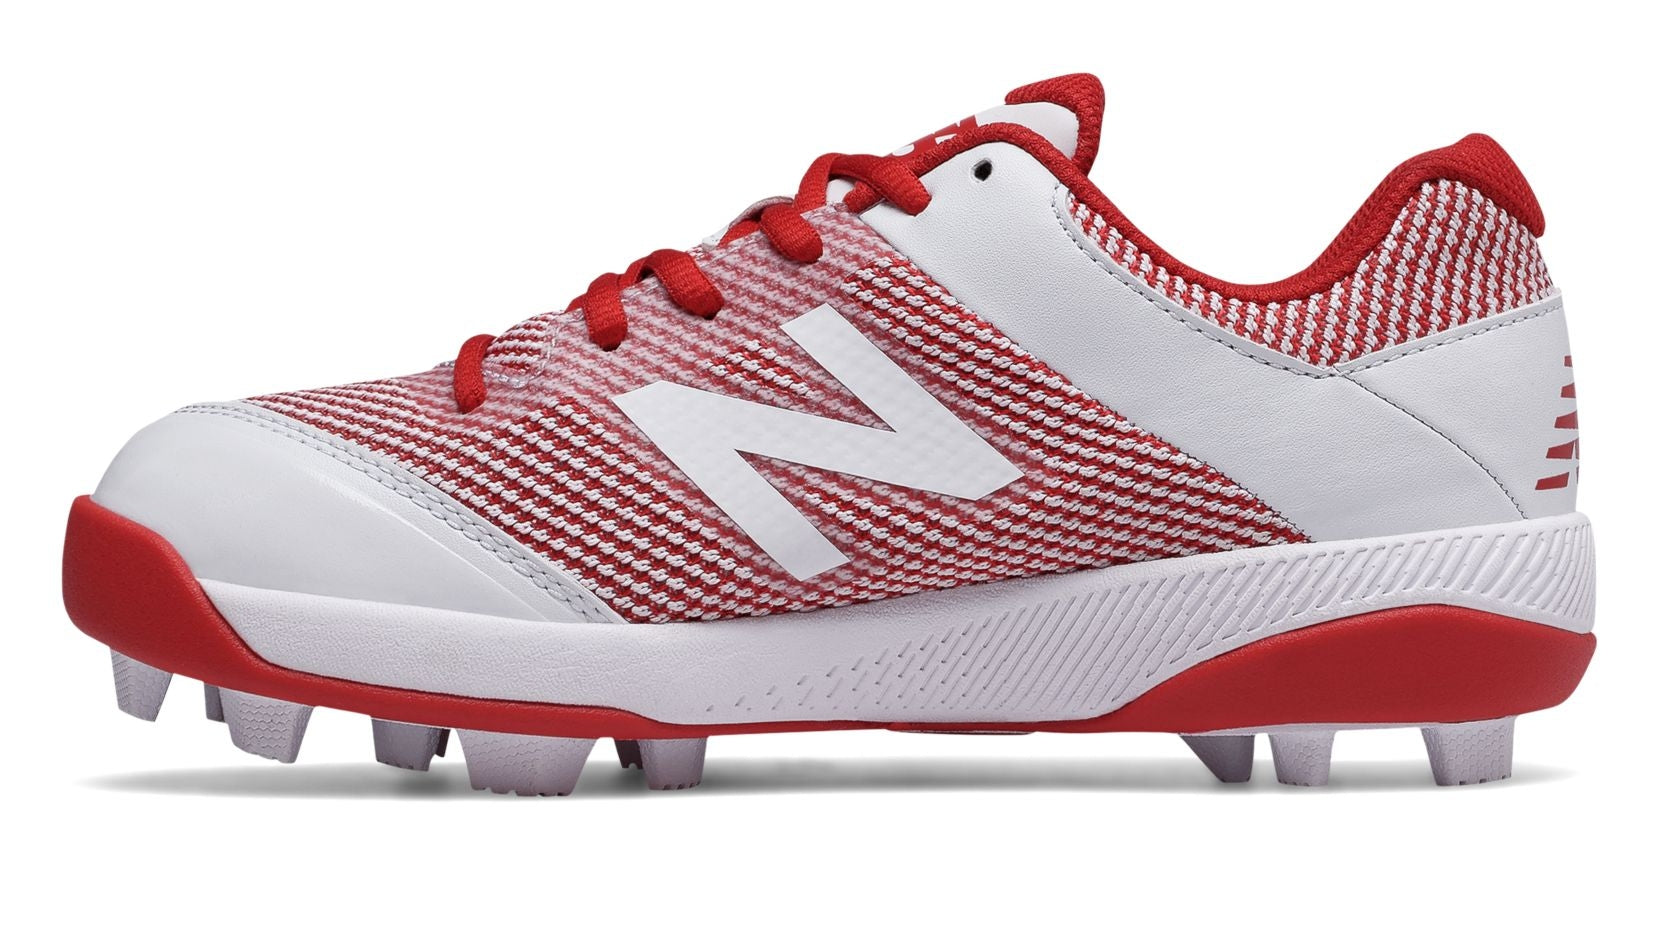 New Balance - Red/White Junior Low Rubber Baseball Cleats (J4040TR4)